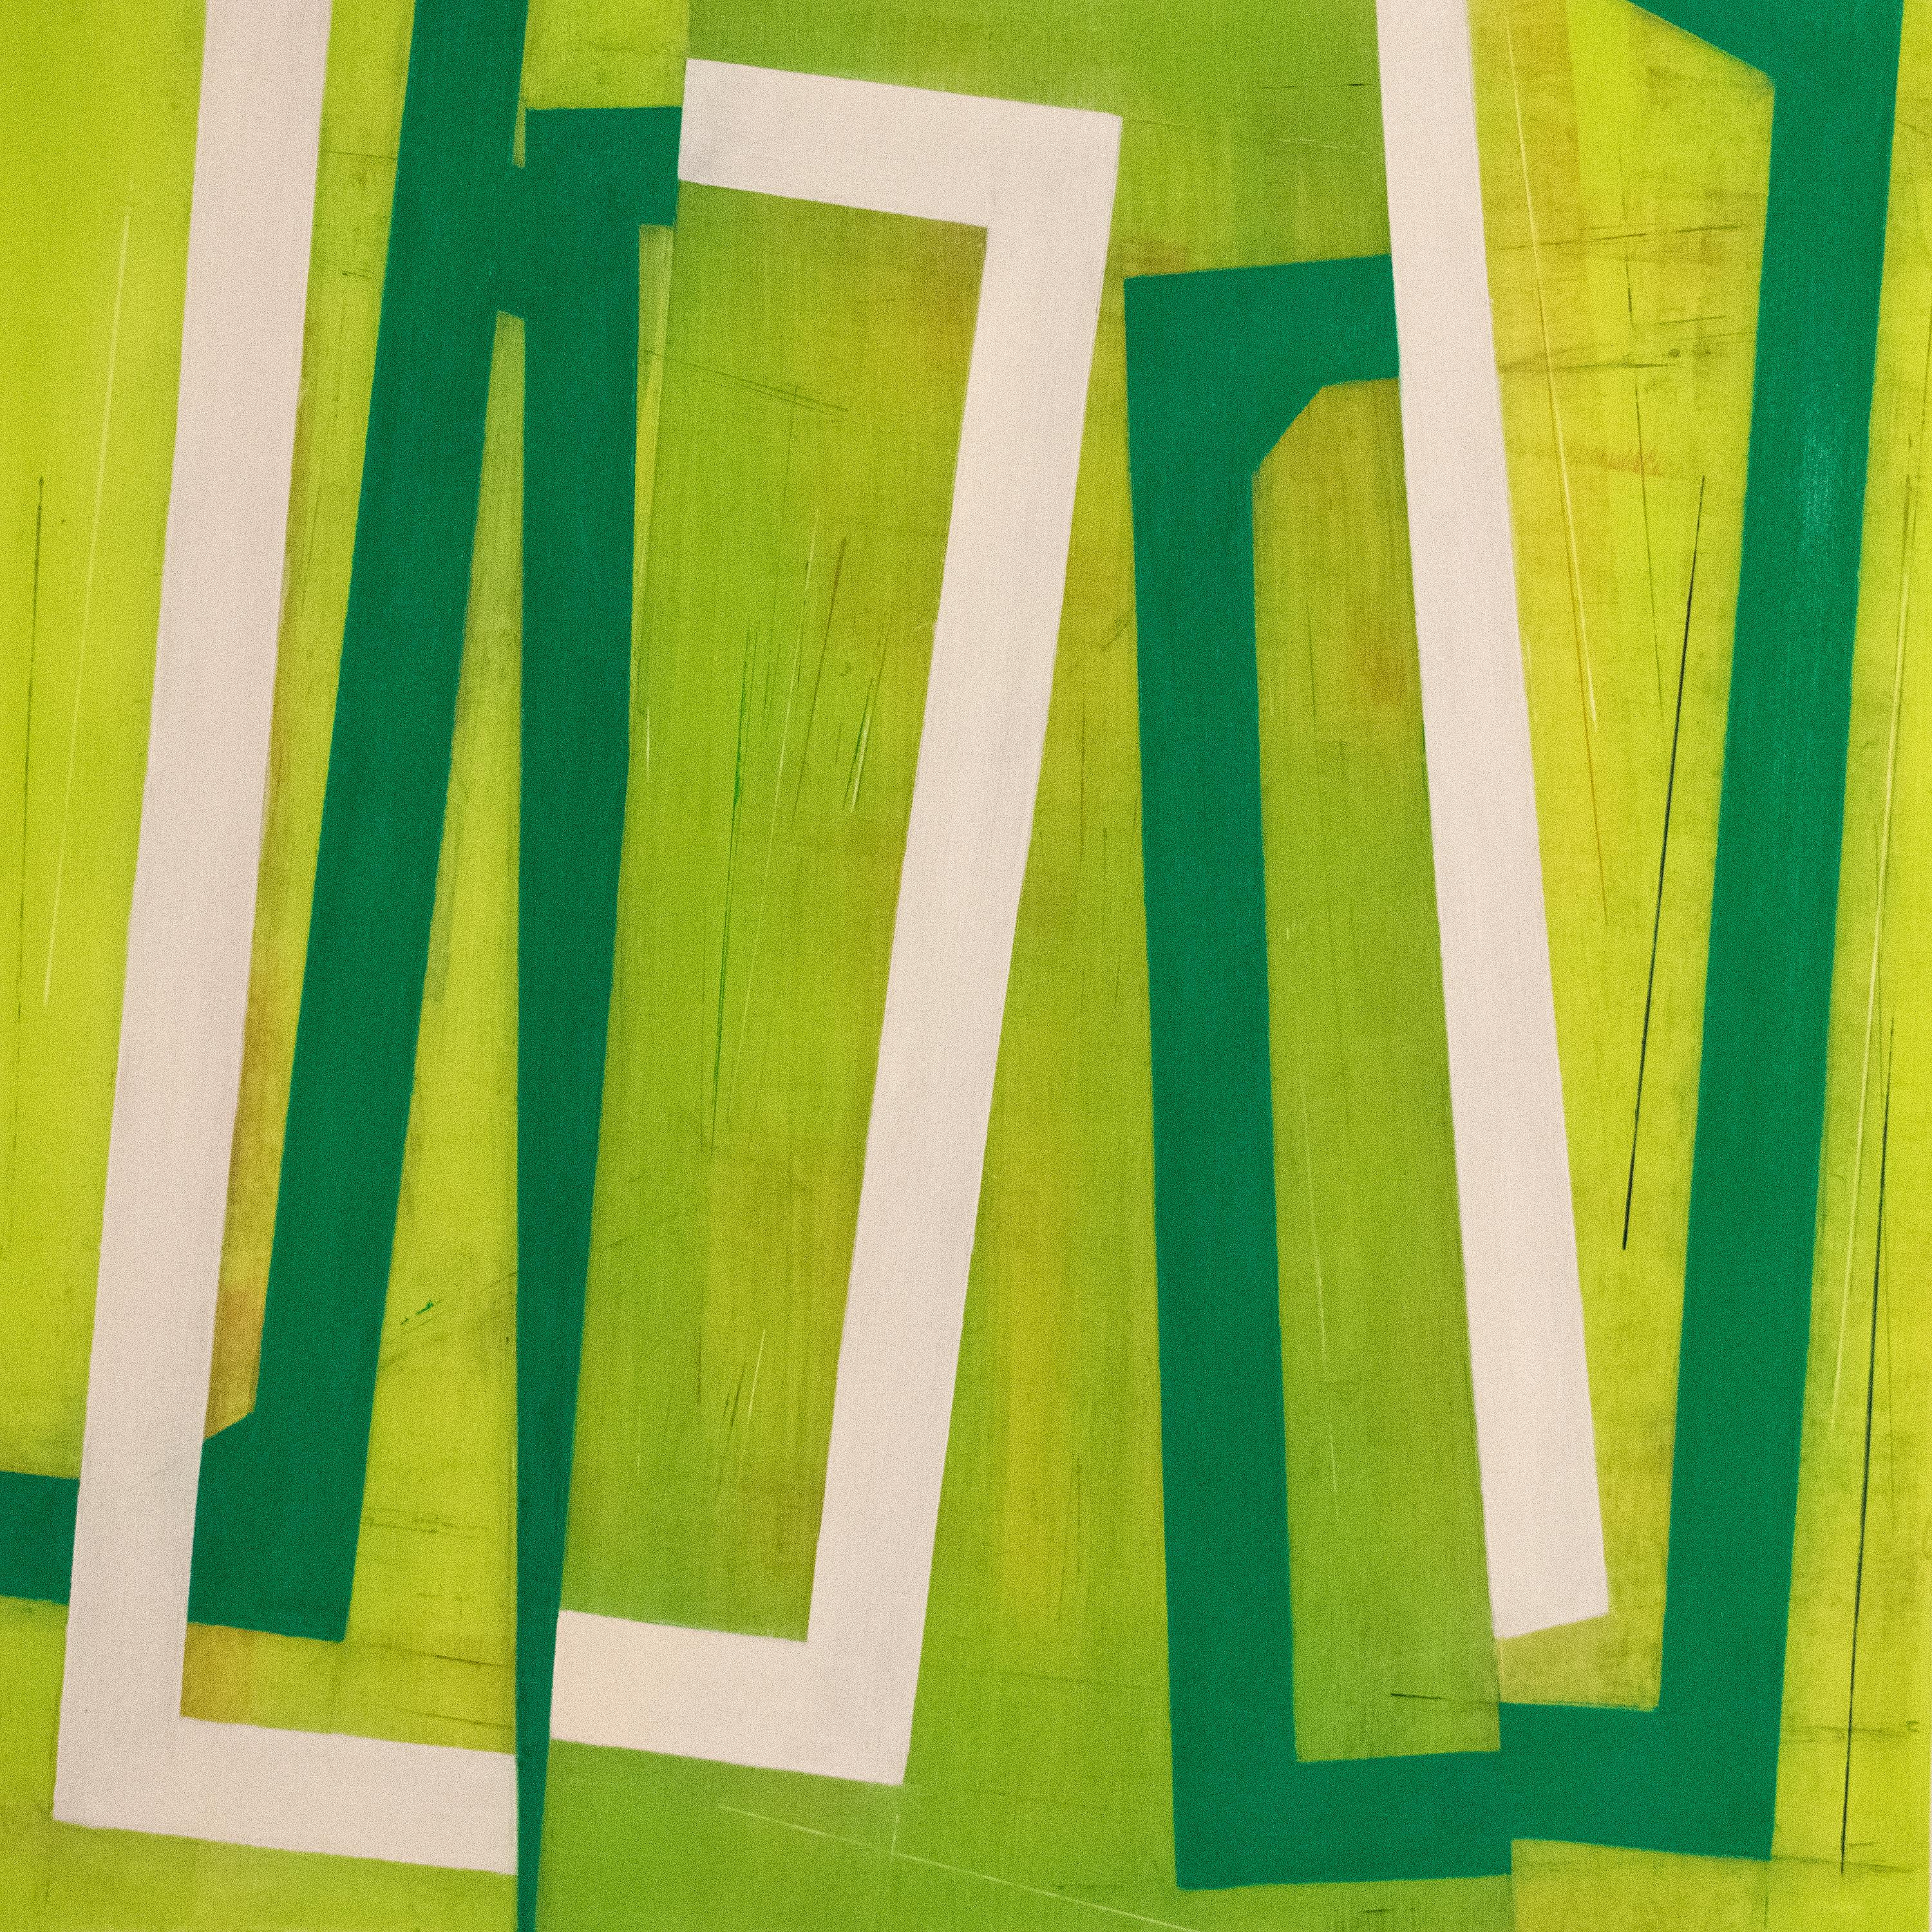 Steven Baris
Jump Cut D11, 2021
oil on Mylar
24 x 24 in. image size 30 x 30 in. framed size
(bari033)

This bold and graphic abstract oil painting on Mylar features geometric green shapes against a rough and painterly background.

"I am drawn to